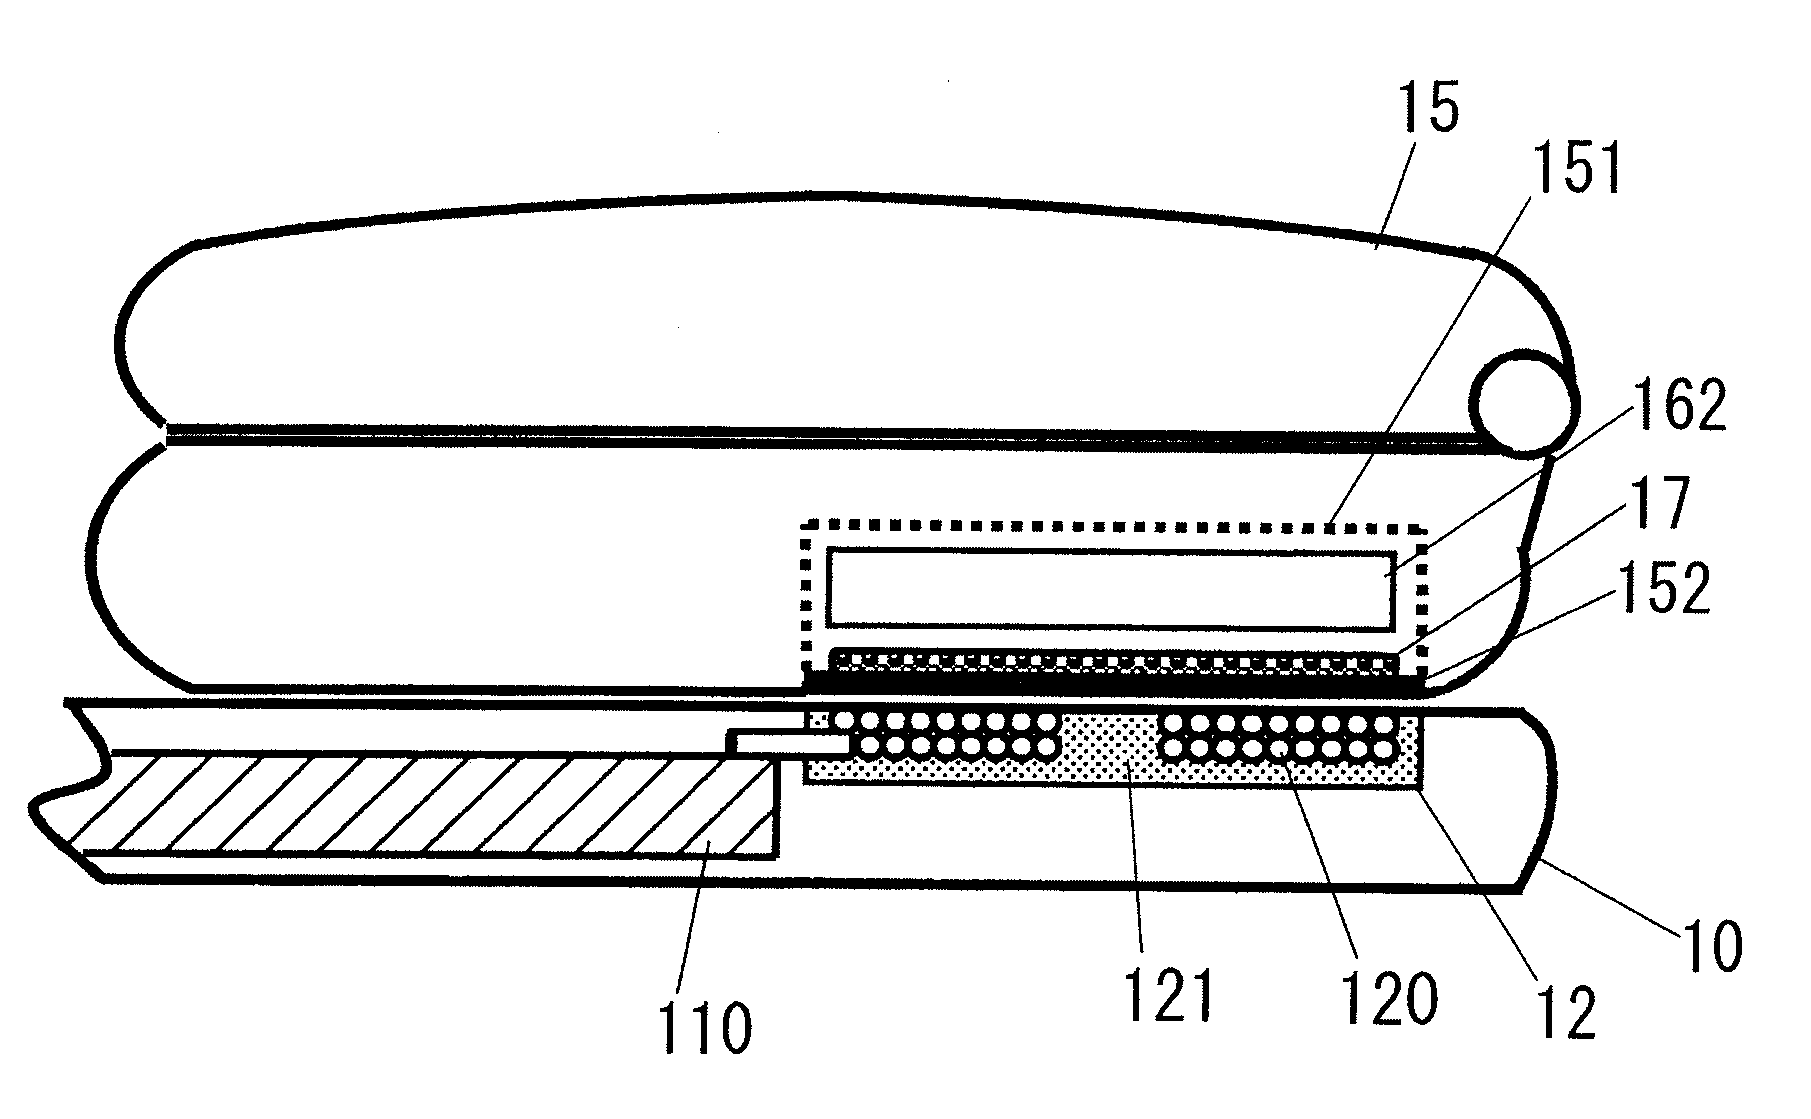 Contactless power transmission apparatus and a method of manufacturing a secondary side thereof